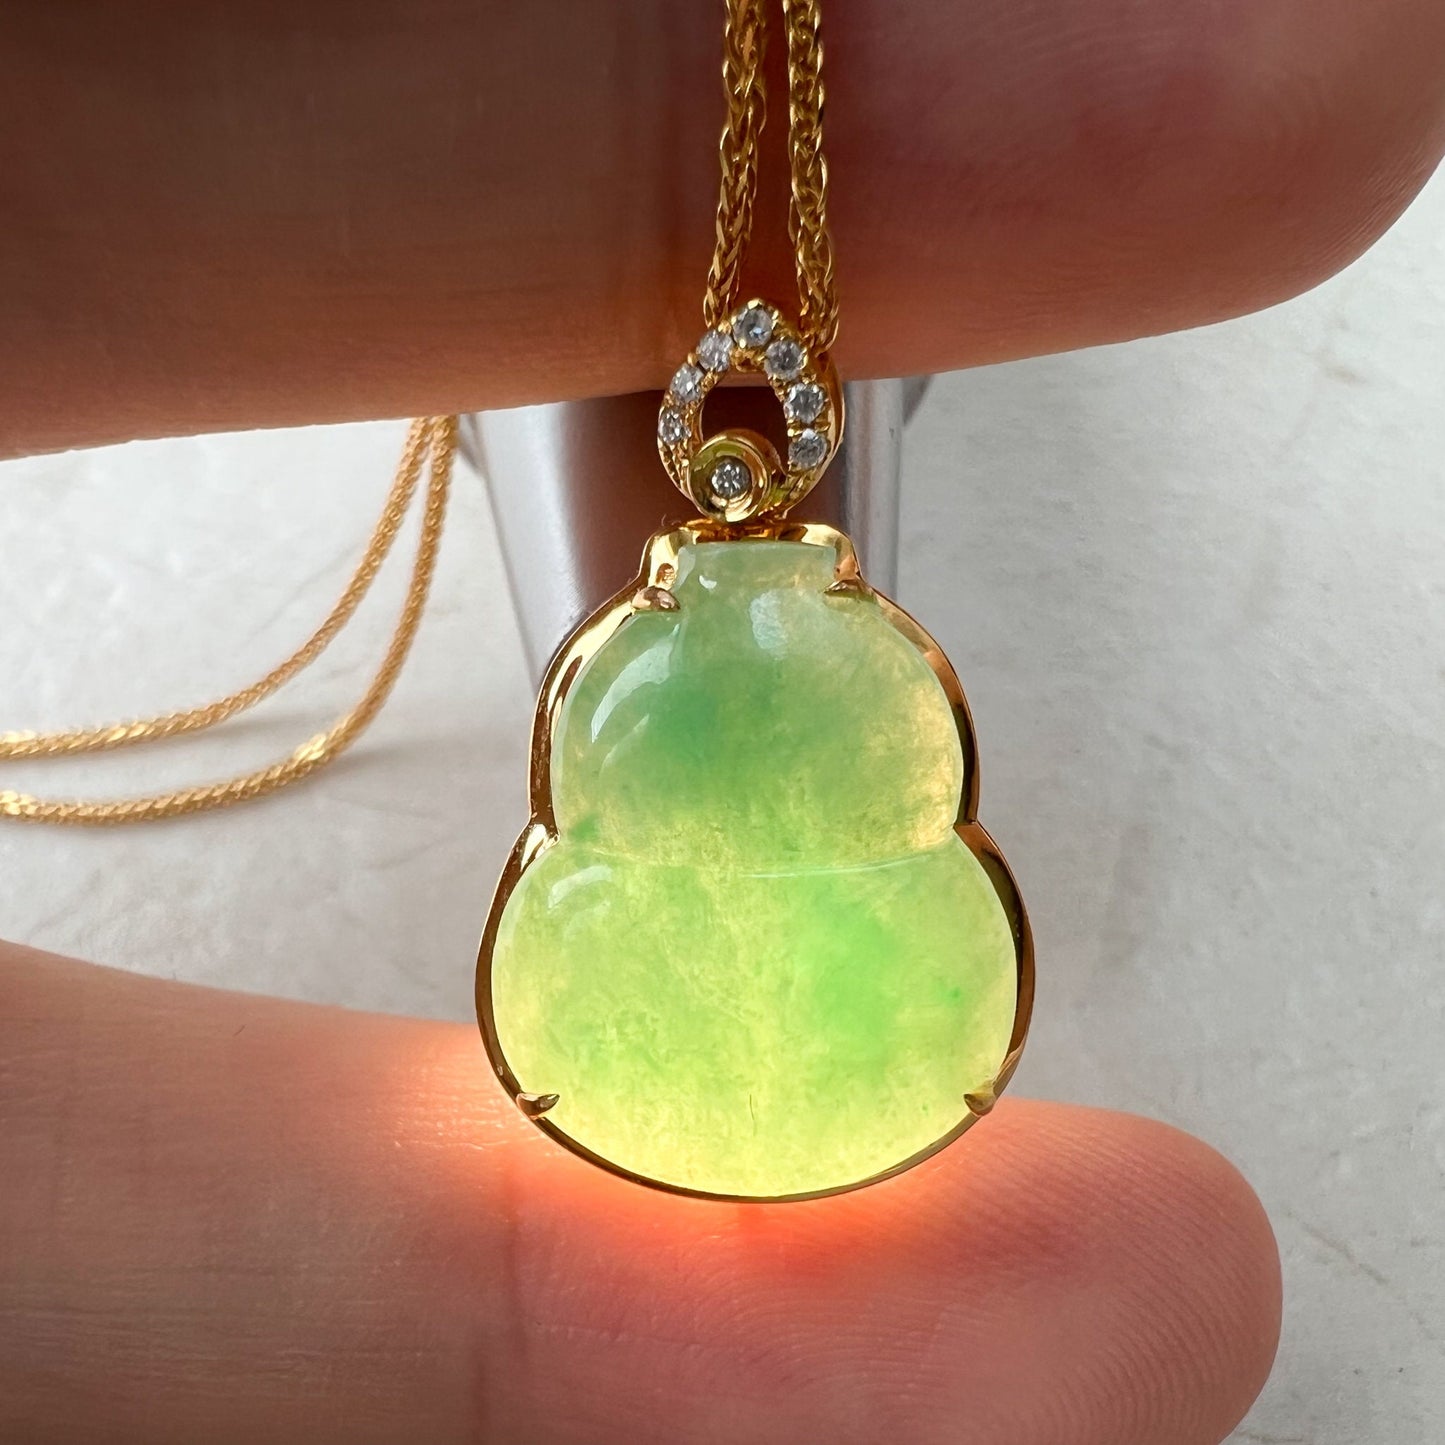 Jade Bottle Gourd, Jadeite Jade, 18K Gold Set, Calabash, Small and Dainty, Hand Carved Pendant Necklace, FSX-0921-KSA32457 - AriaDesignCollection